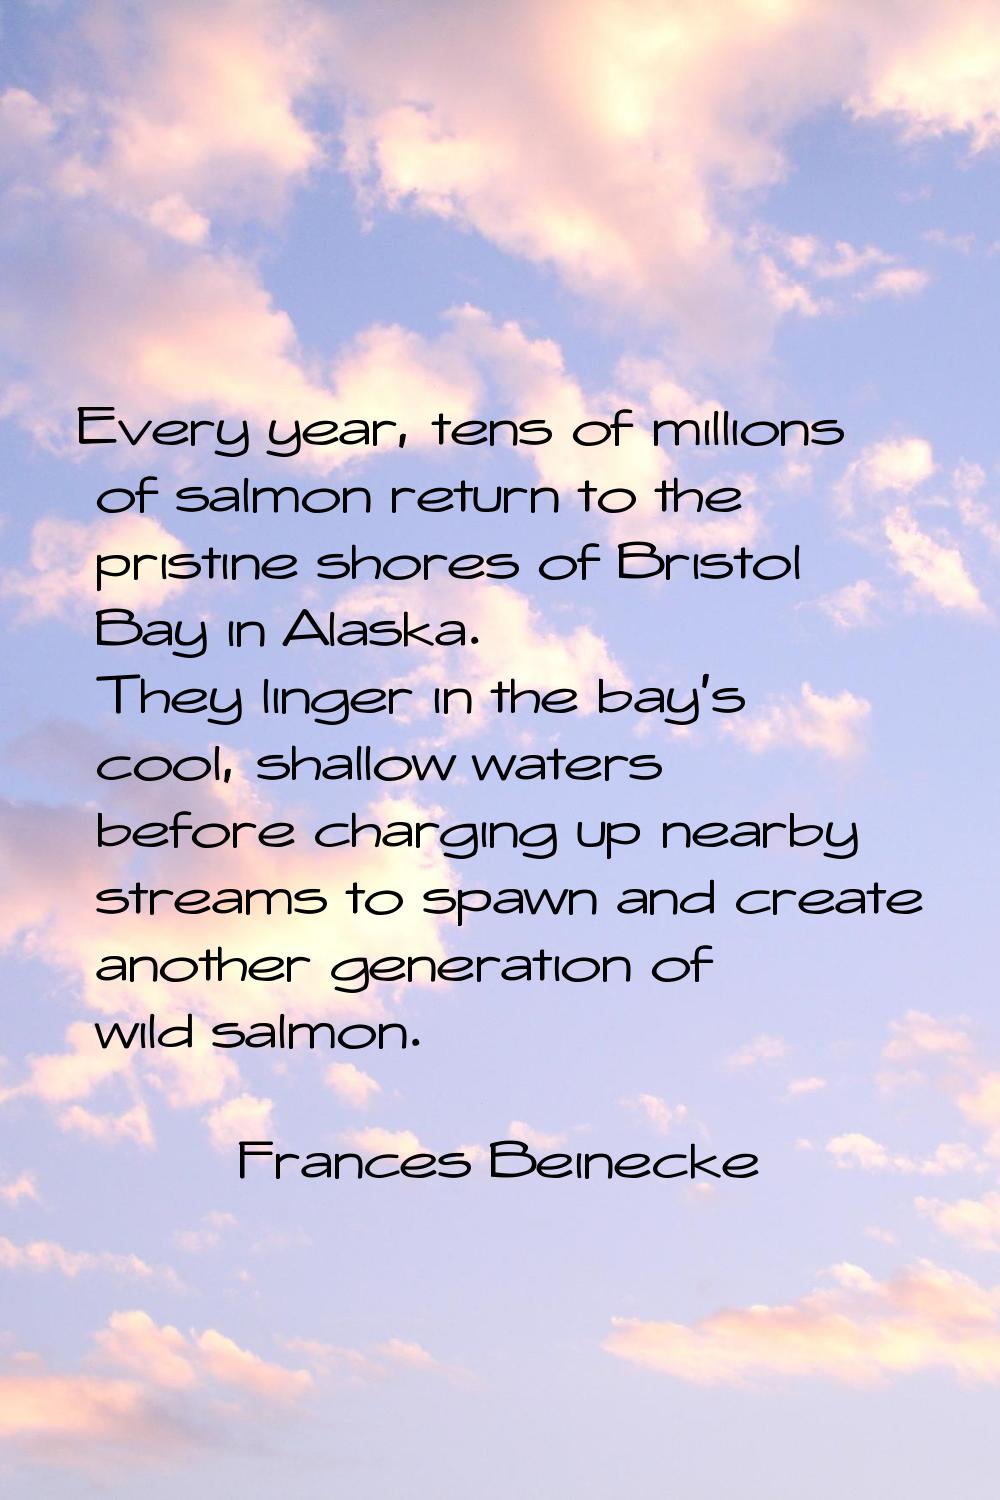 Every year, tens of millions of salmon return to the pristine shores of Bristol Bay in Alaska. They